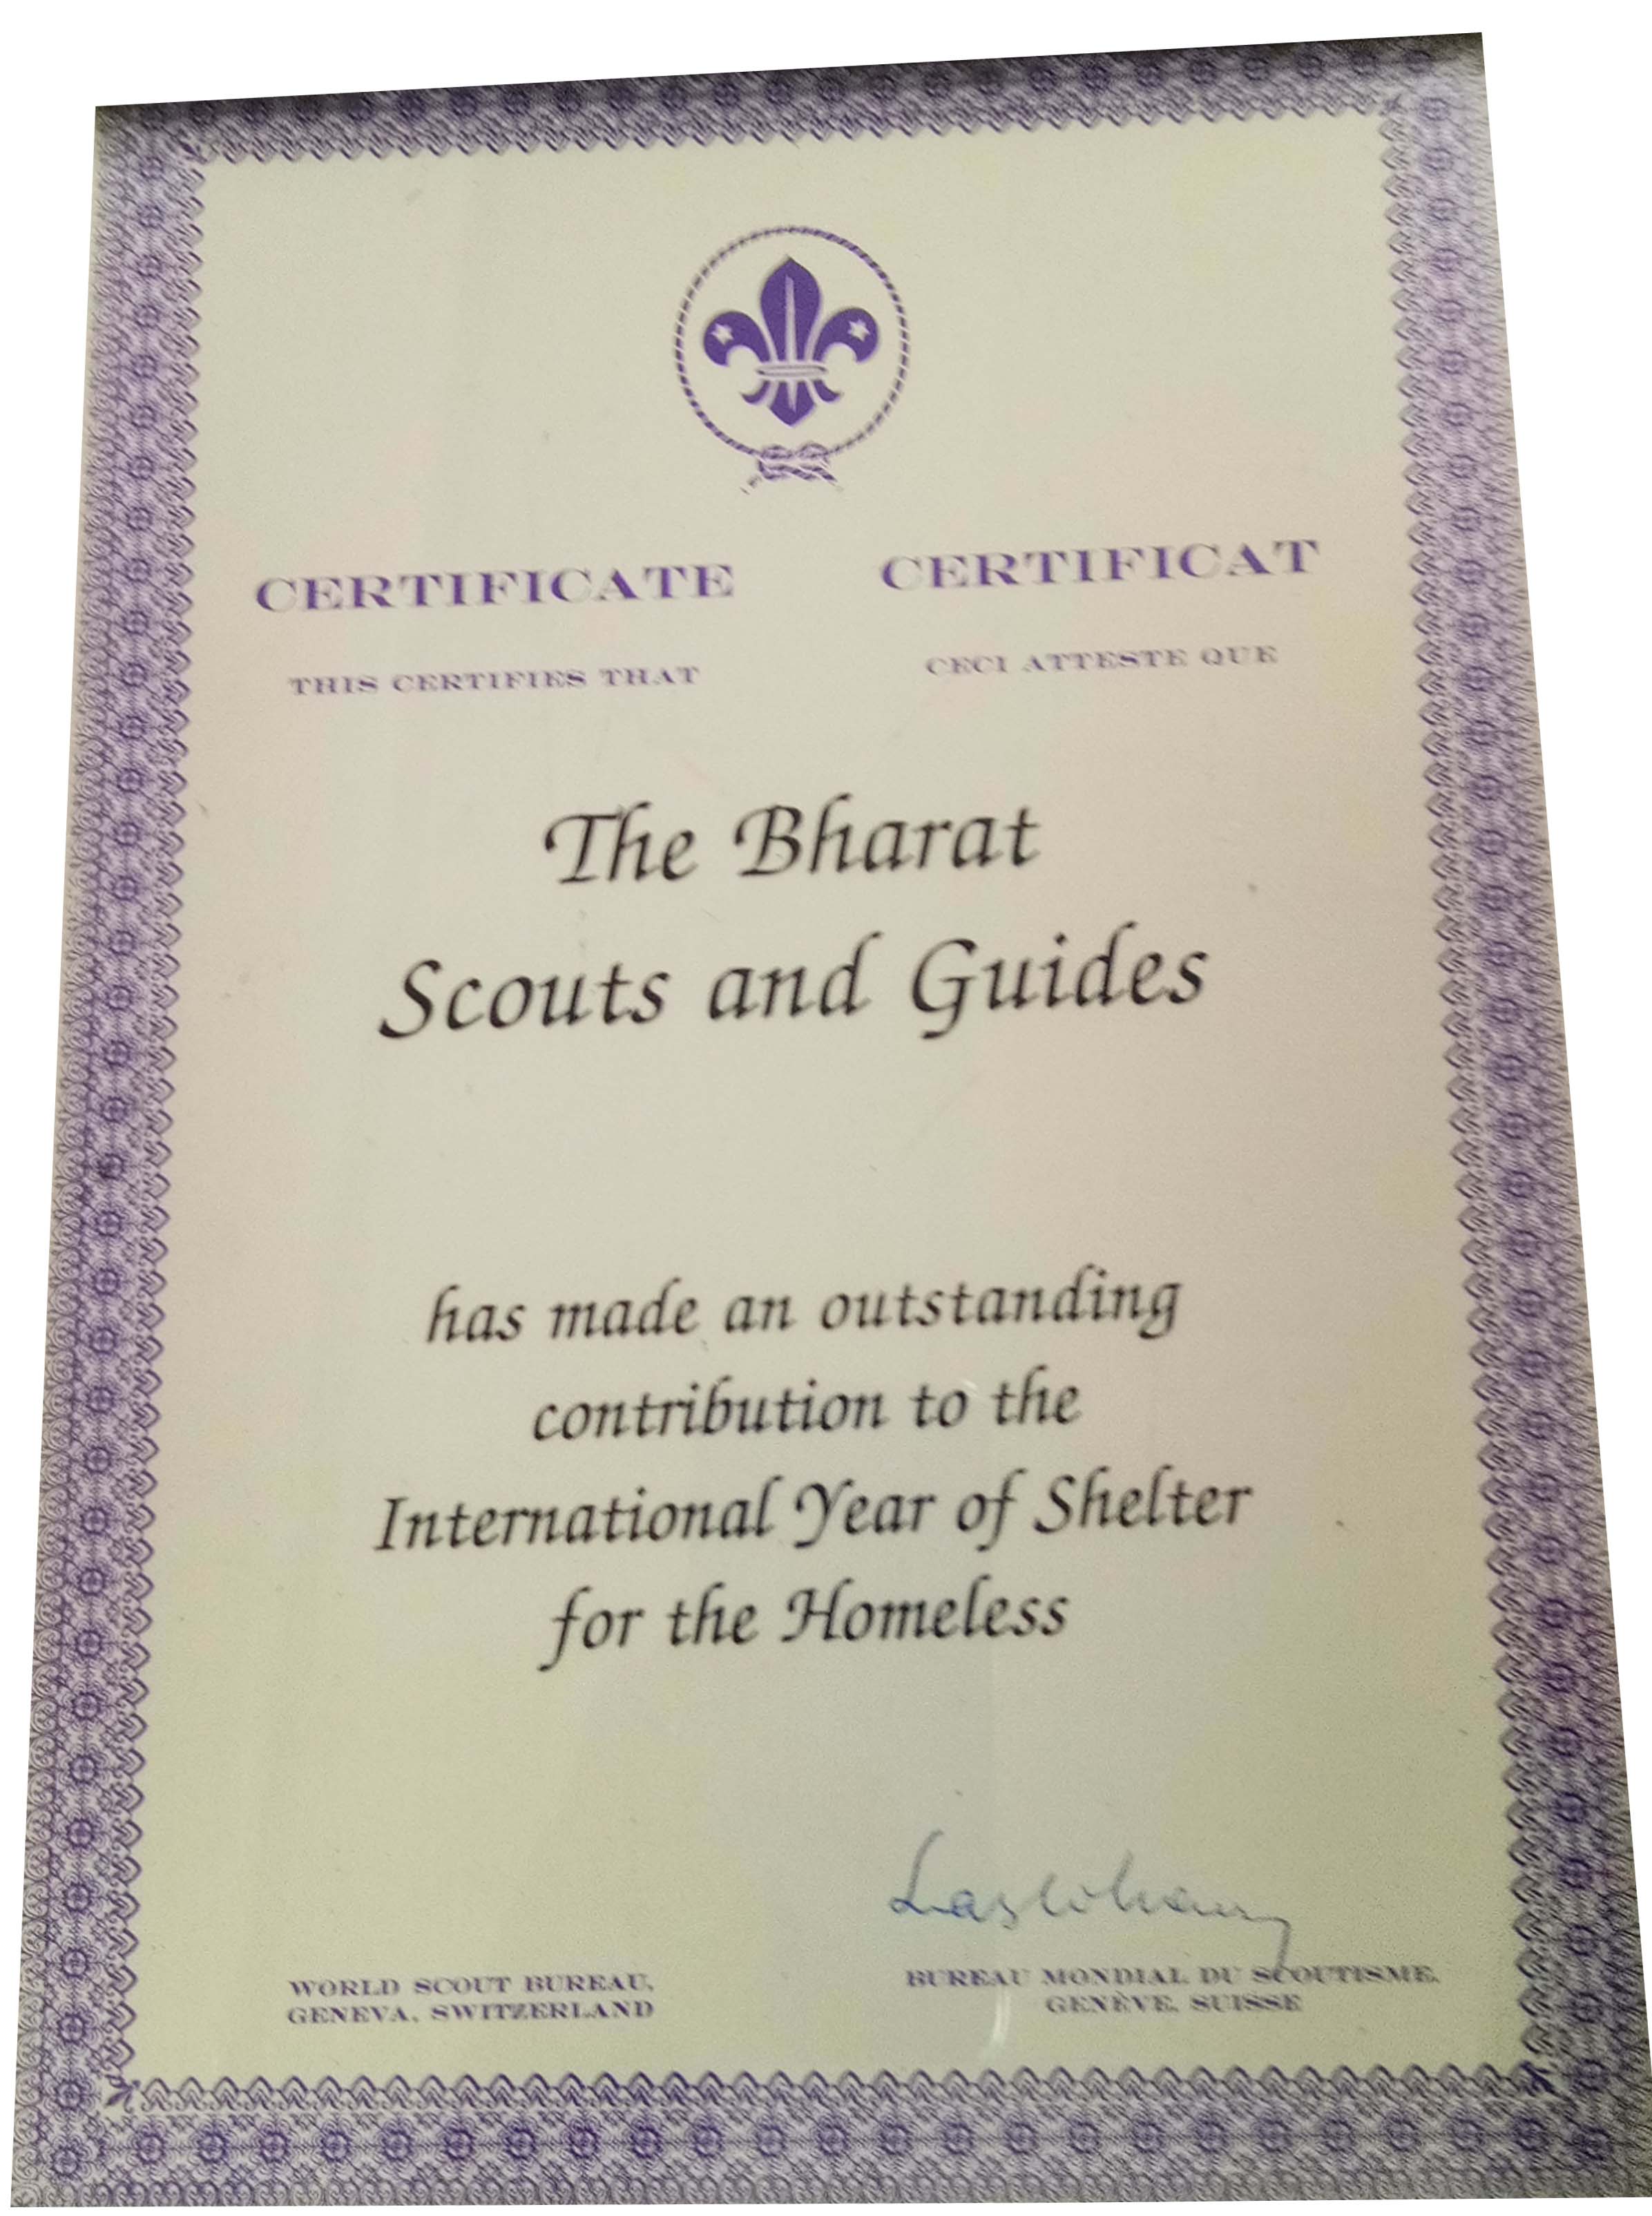 A special certificate from World Organization of Scout Movement for contribution to International year of shelter for Homeless